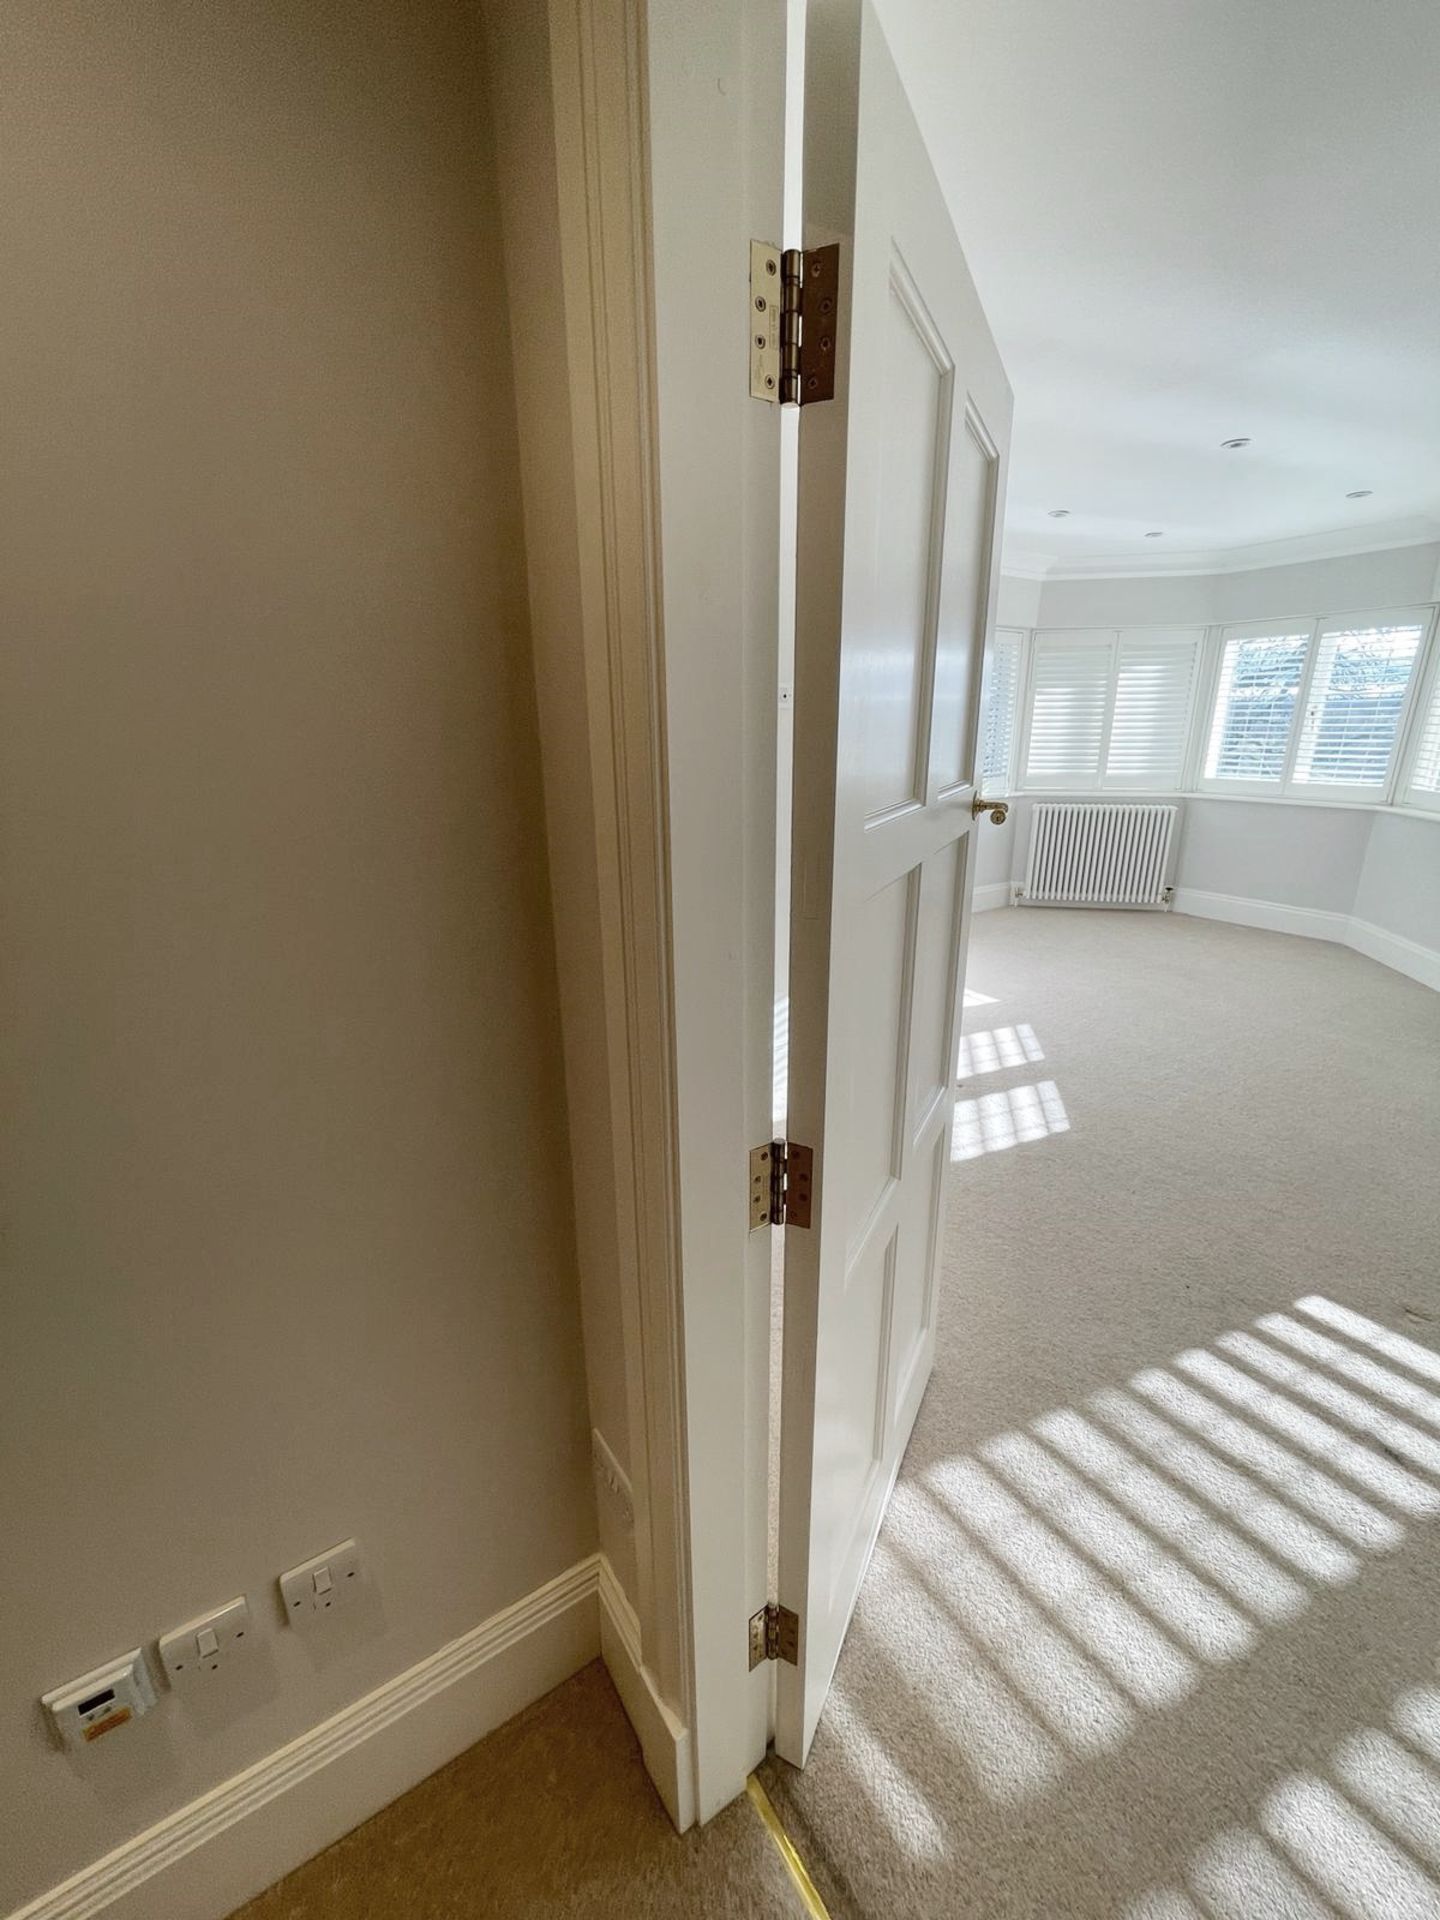 1 x Solid Wood Lockable Painted  Internal Door in White - Includes Handles and Hinges - Image 10 of 10